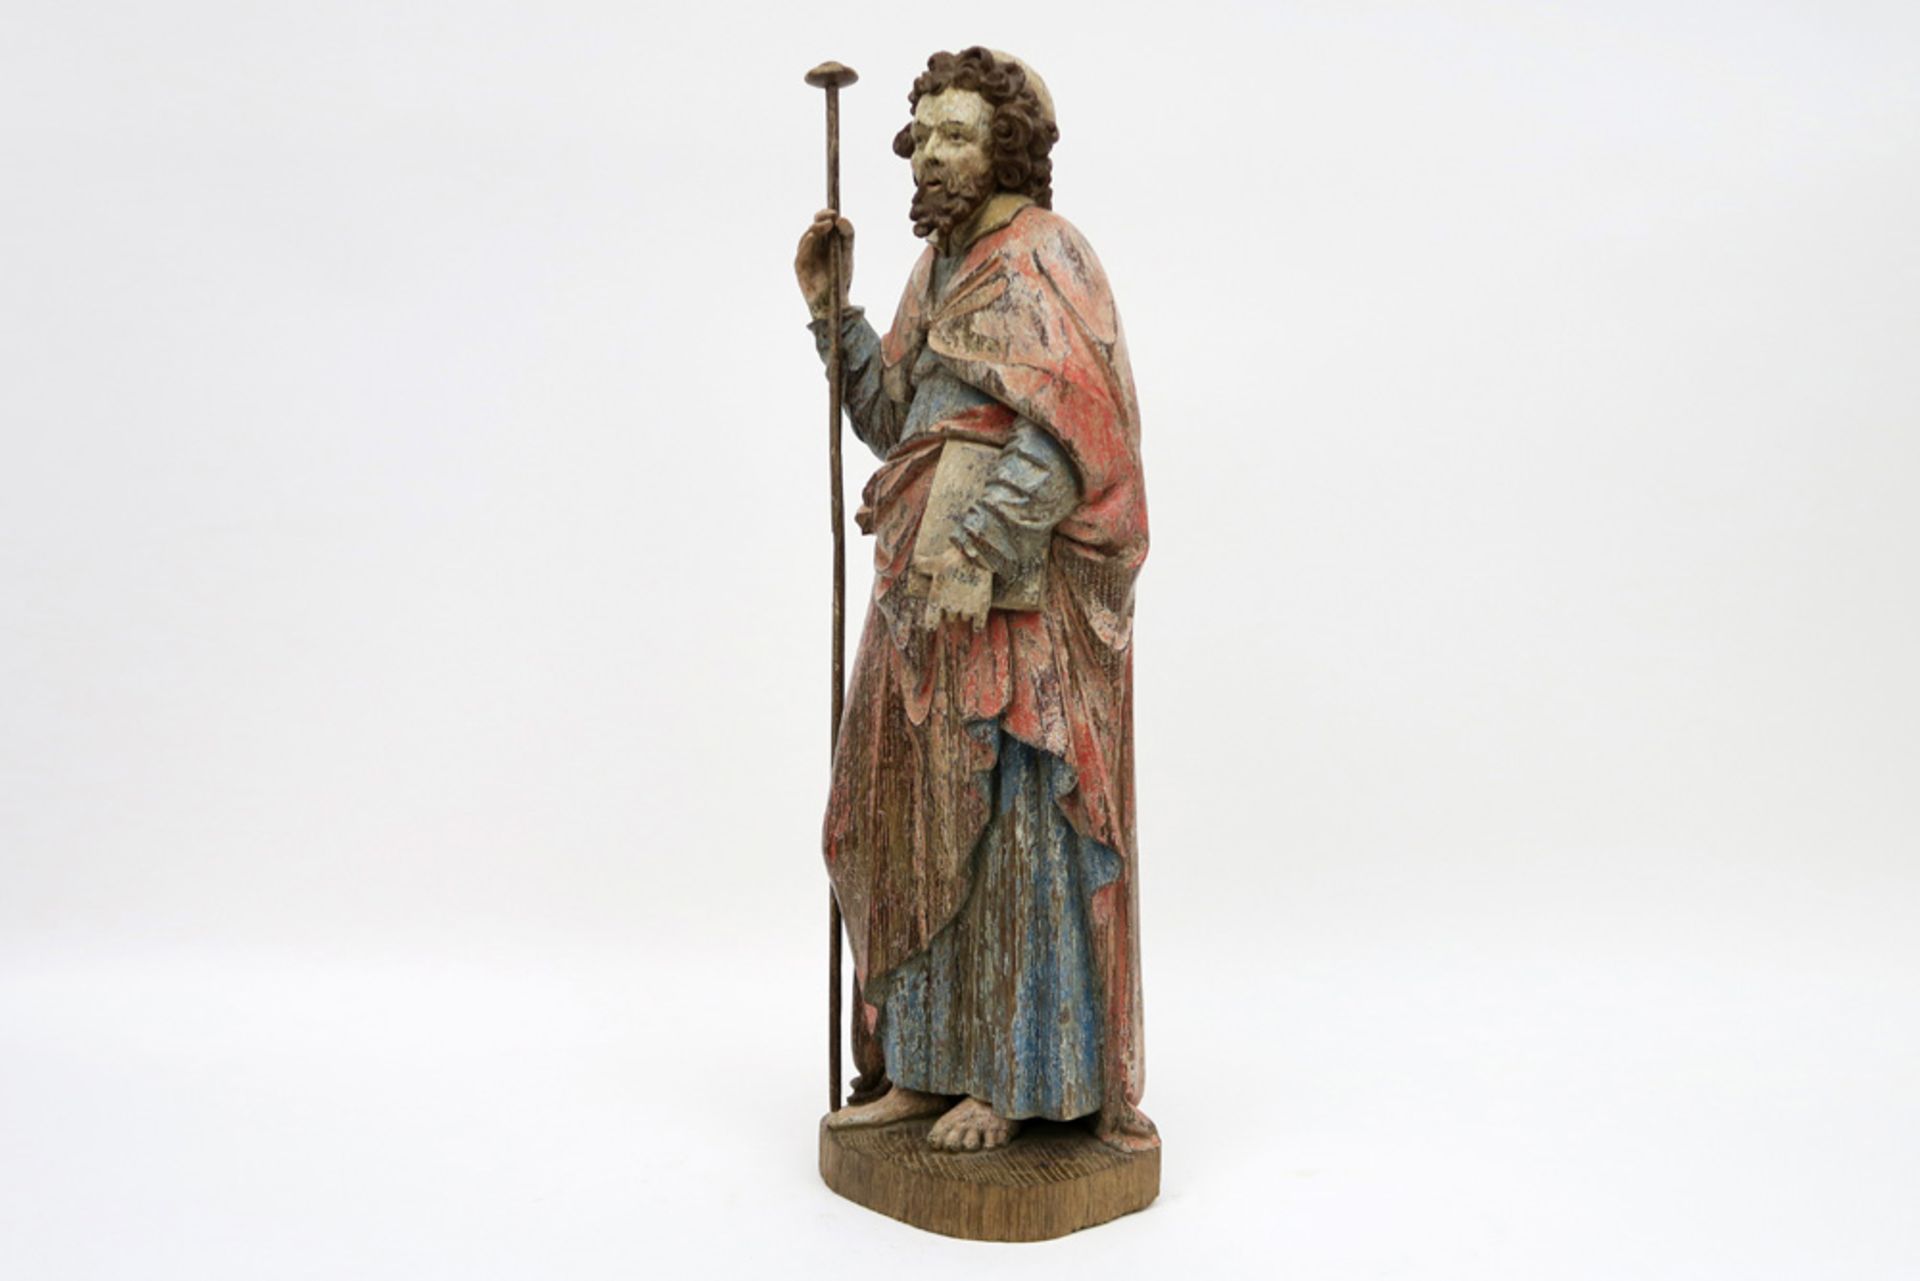 16th Cent. European gothic style "Saint with book" sculpture in polychromed wood || EUROPA - 16° - Bild 3 aus 4